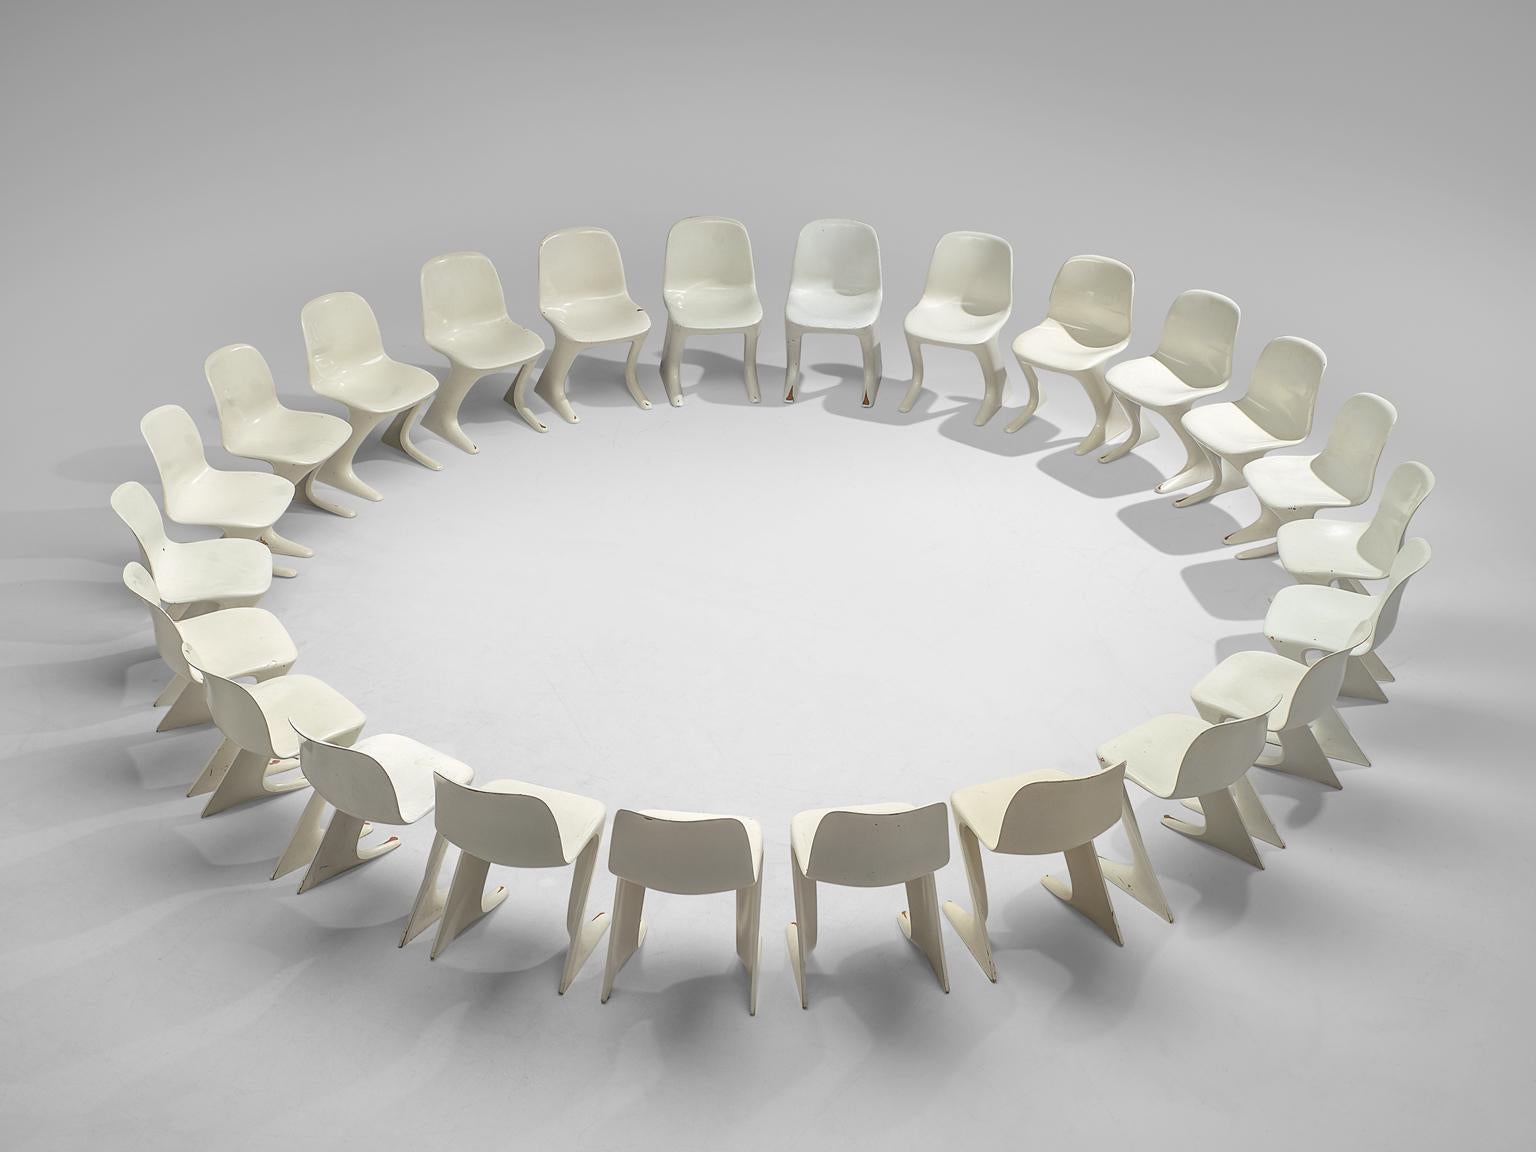 Ernst Moeckl for Trabant, 'Z' chairs, fiberglass, Germany, 1968

This set of white Kangaroo chairs is designed by Ernste Moeckl in 1968. The chair is also called the Z-chair, referring to its shape. During the period of the Iron Curtain, the Panton